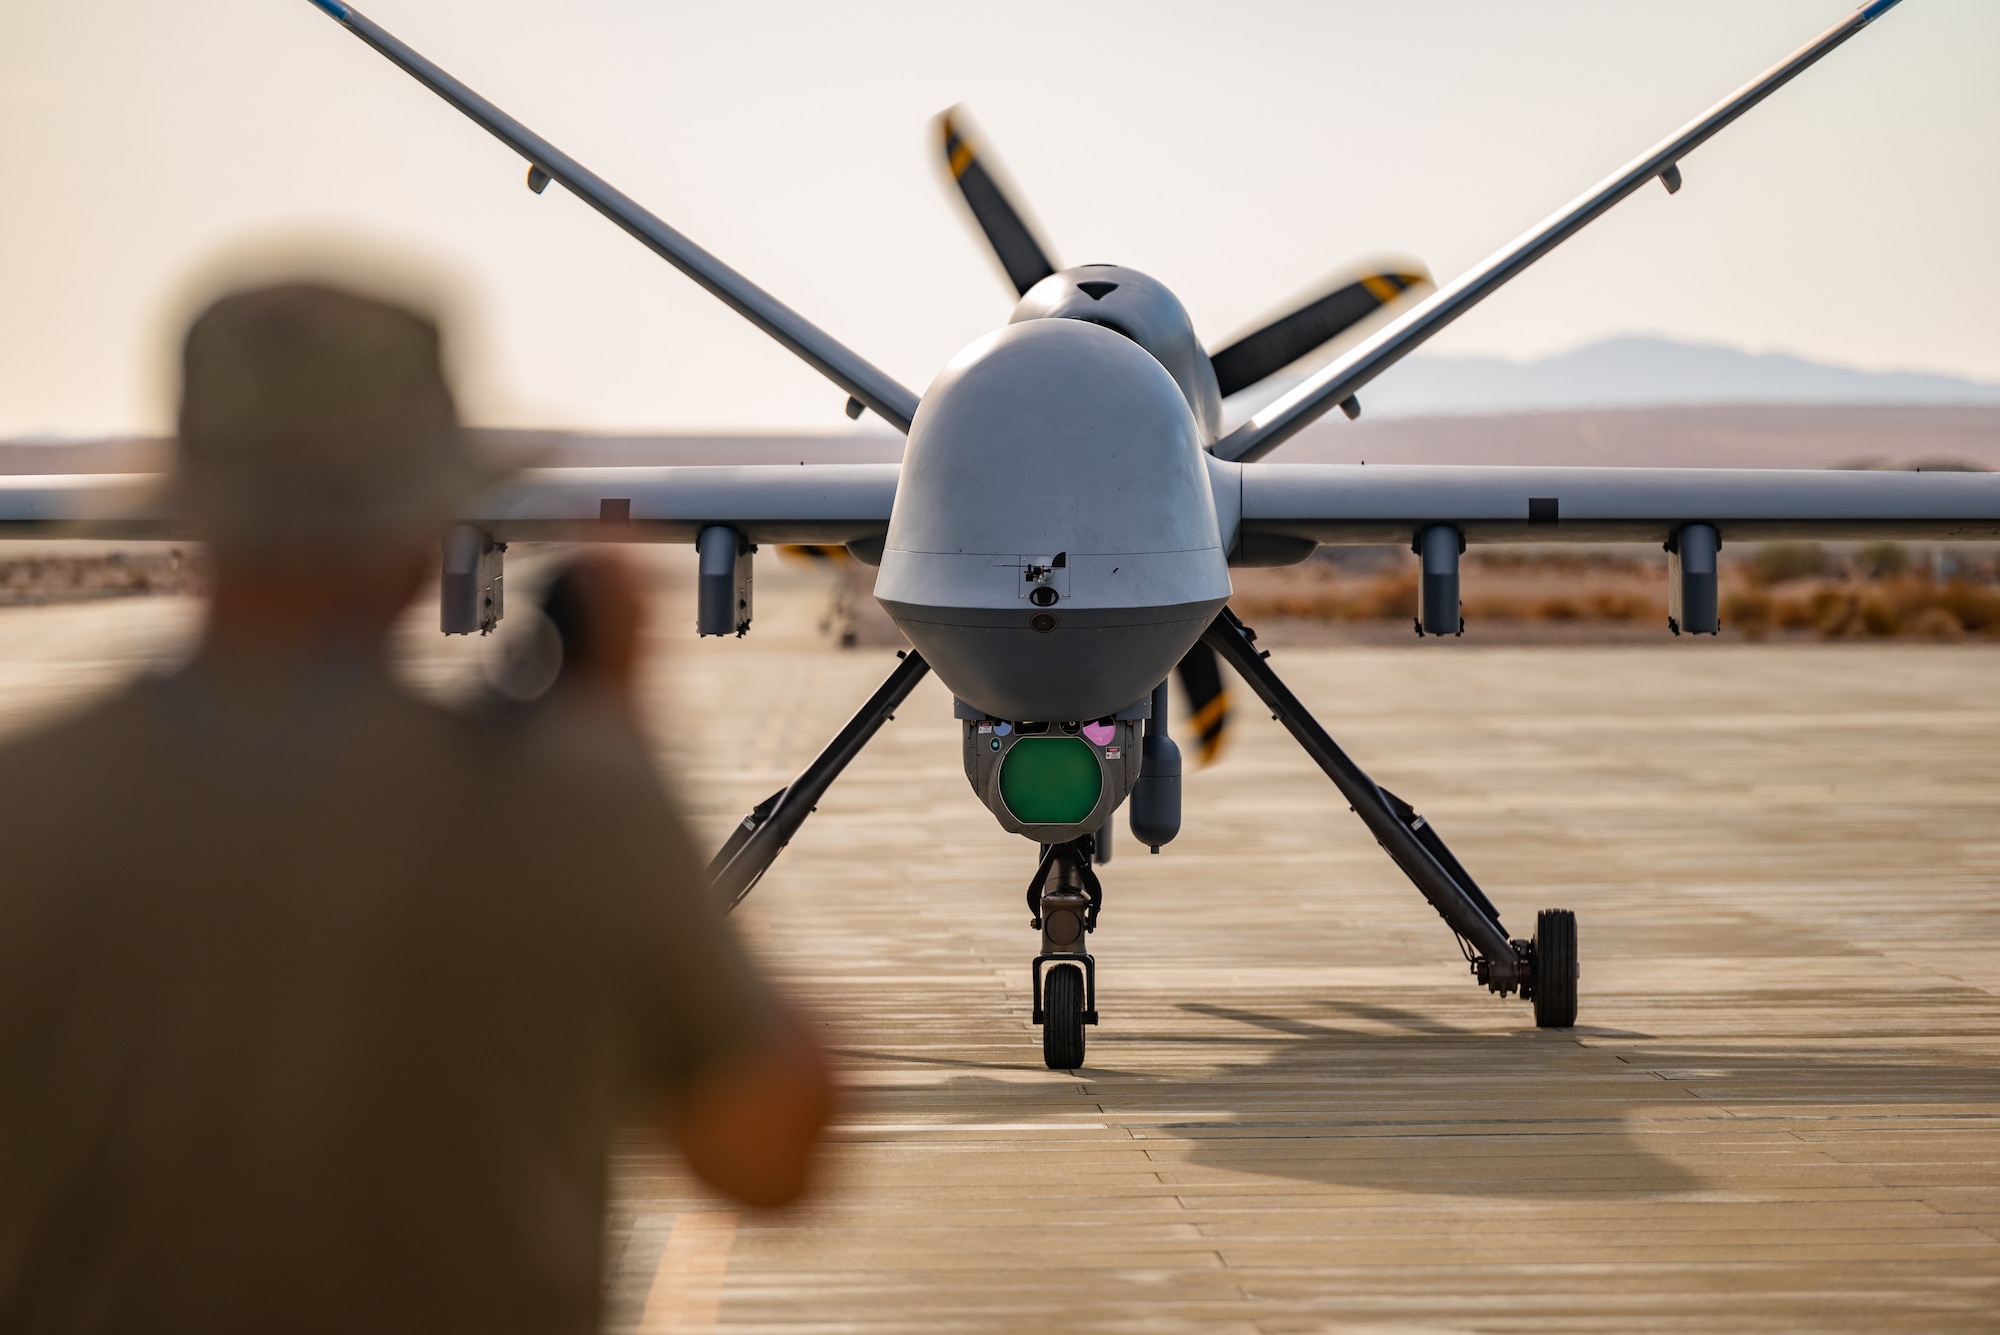 A Crew Chief assigned to the 163d Attack Wing, March Air Reserve Base marshals MQ-9 Reaper on the Strategic Expeditionary Landing Field on Marine Corps Air Ground Combat Center Twentynine Palms, California, July 21, 2022. The 163d accelerated change by pioneering the first ever refueling of the MQ-9 Reaper using a Forward Area refueling Point provided by the VMM - 764’s V-22 Osprey. (U.S. Air National Guard photo by Staff Sgt. Joseph Pagan)